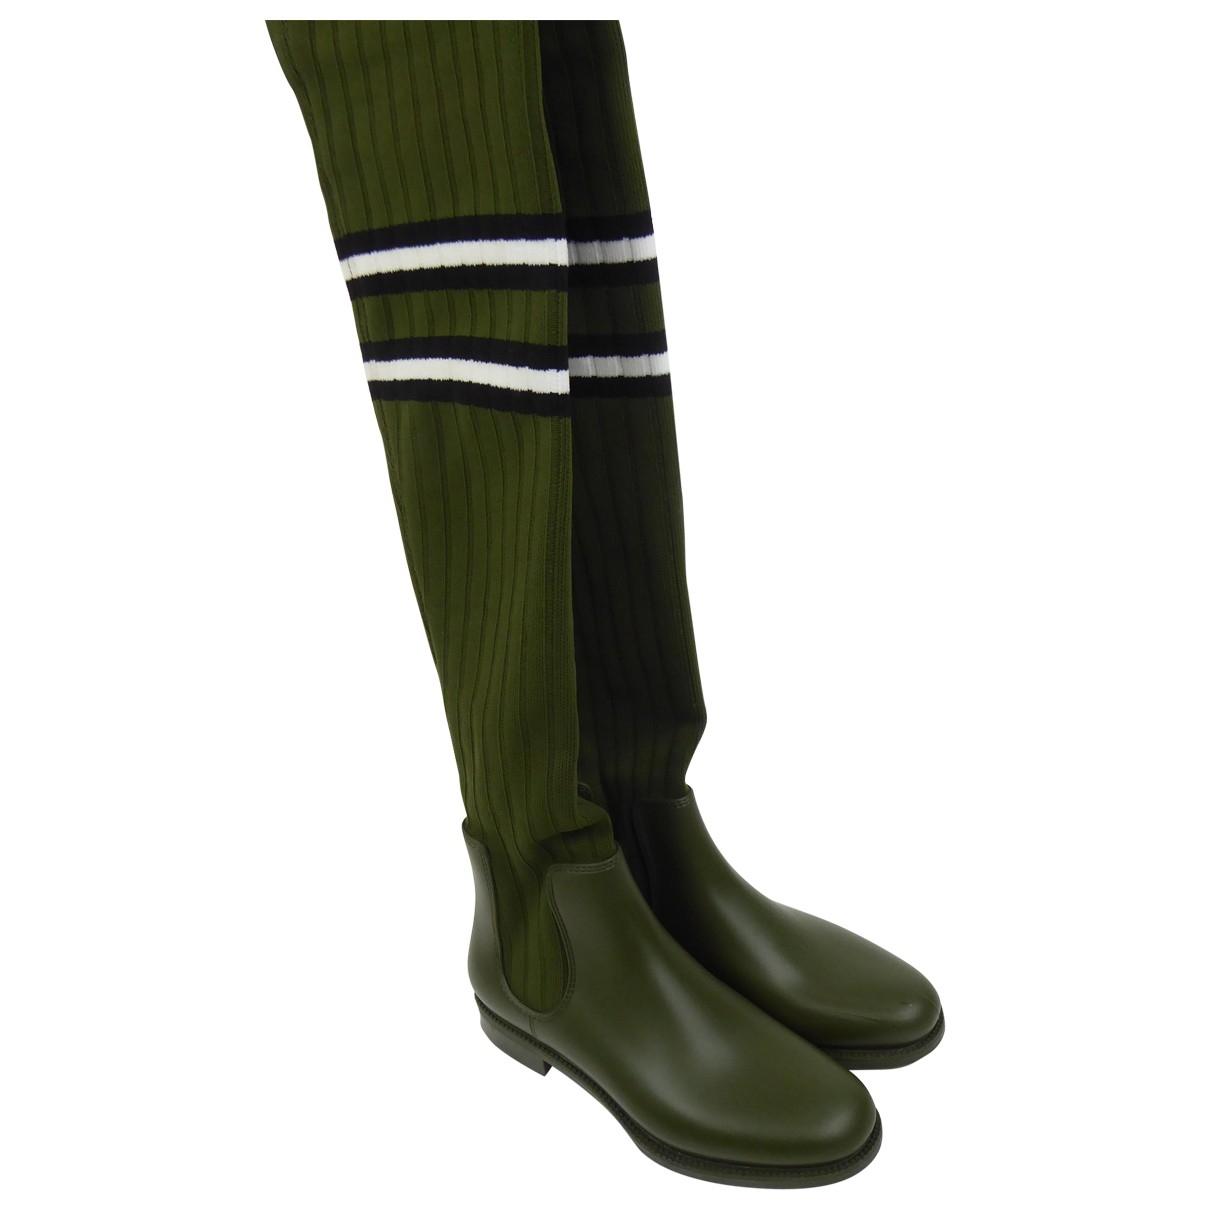 Givenchy Cloth Boots in Green - Lyst